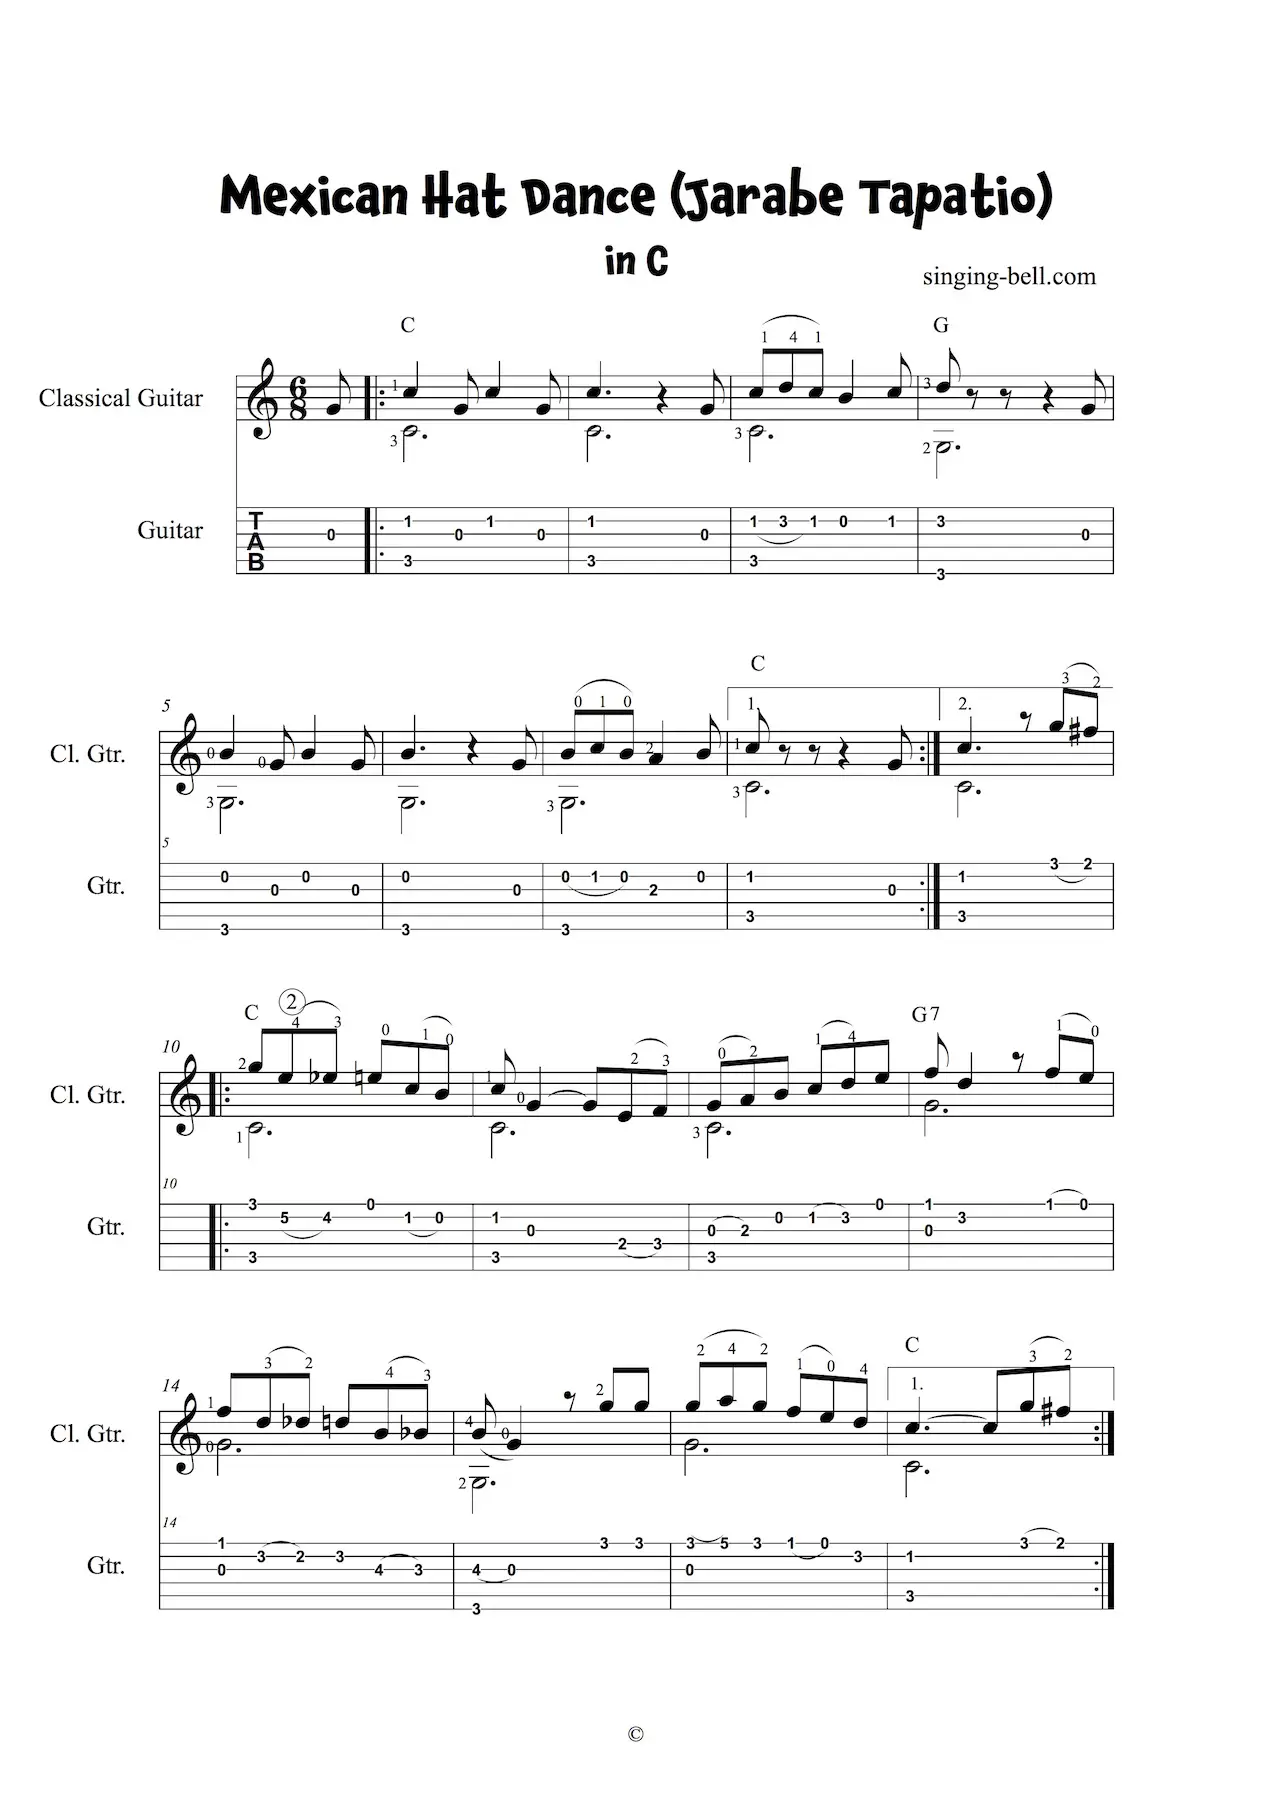 Mexican Hat Dance Jarabe Tapatio Easy Guitar Sheet Music with Notes and Tablature in C page 1.